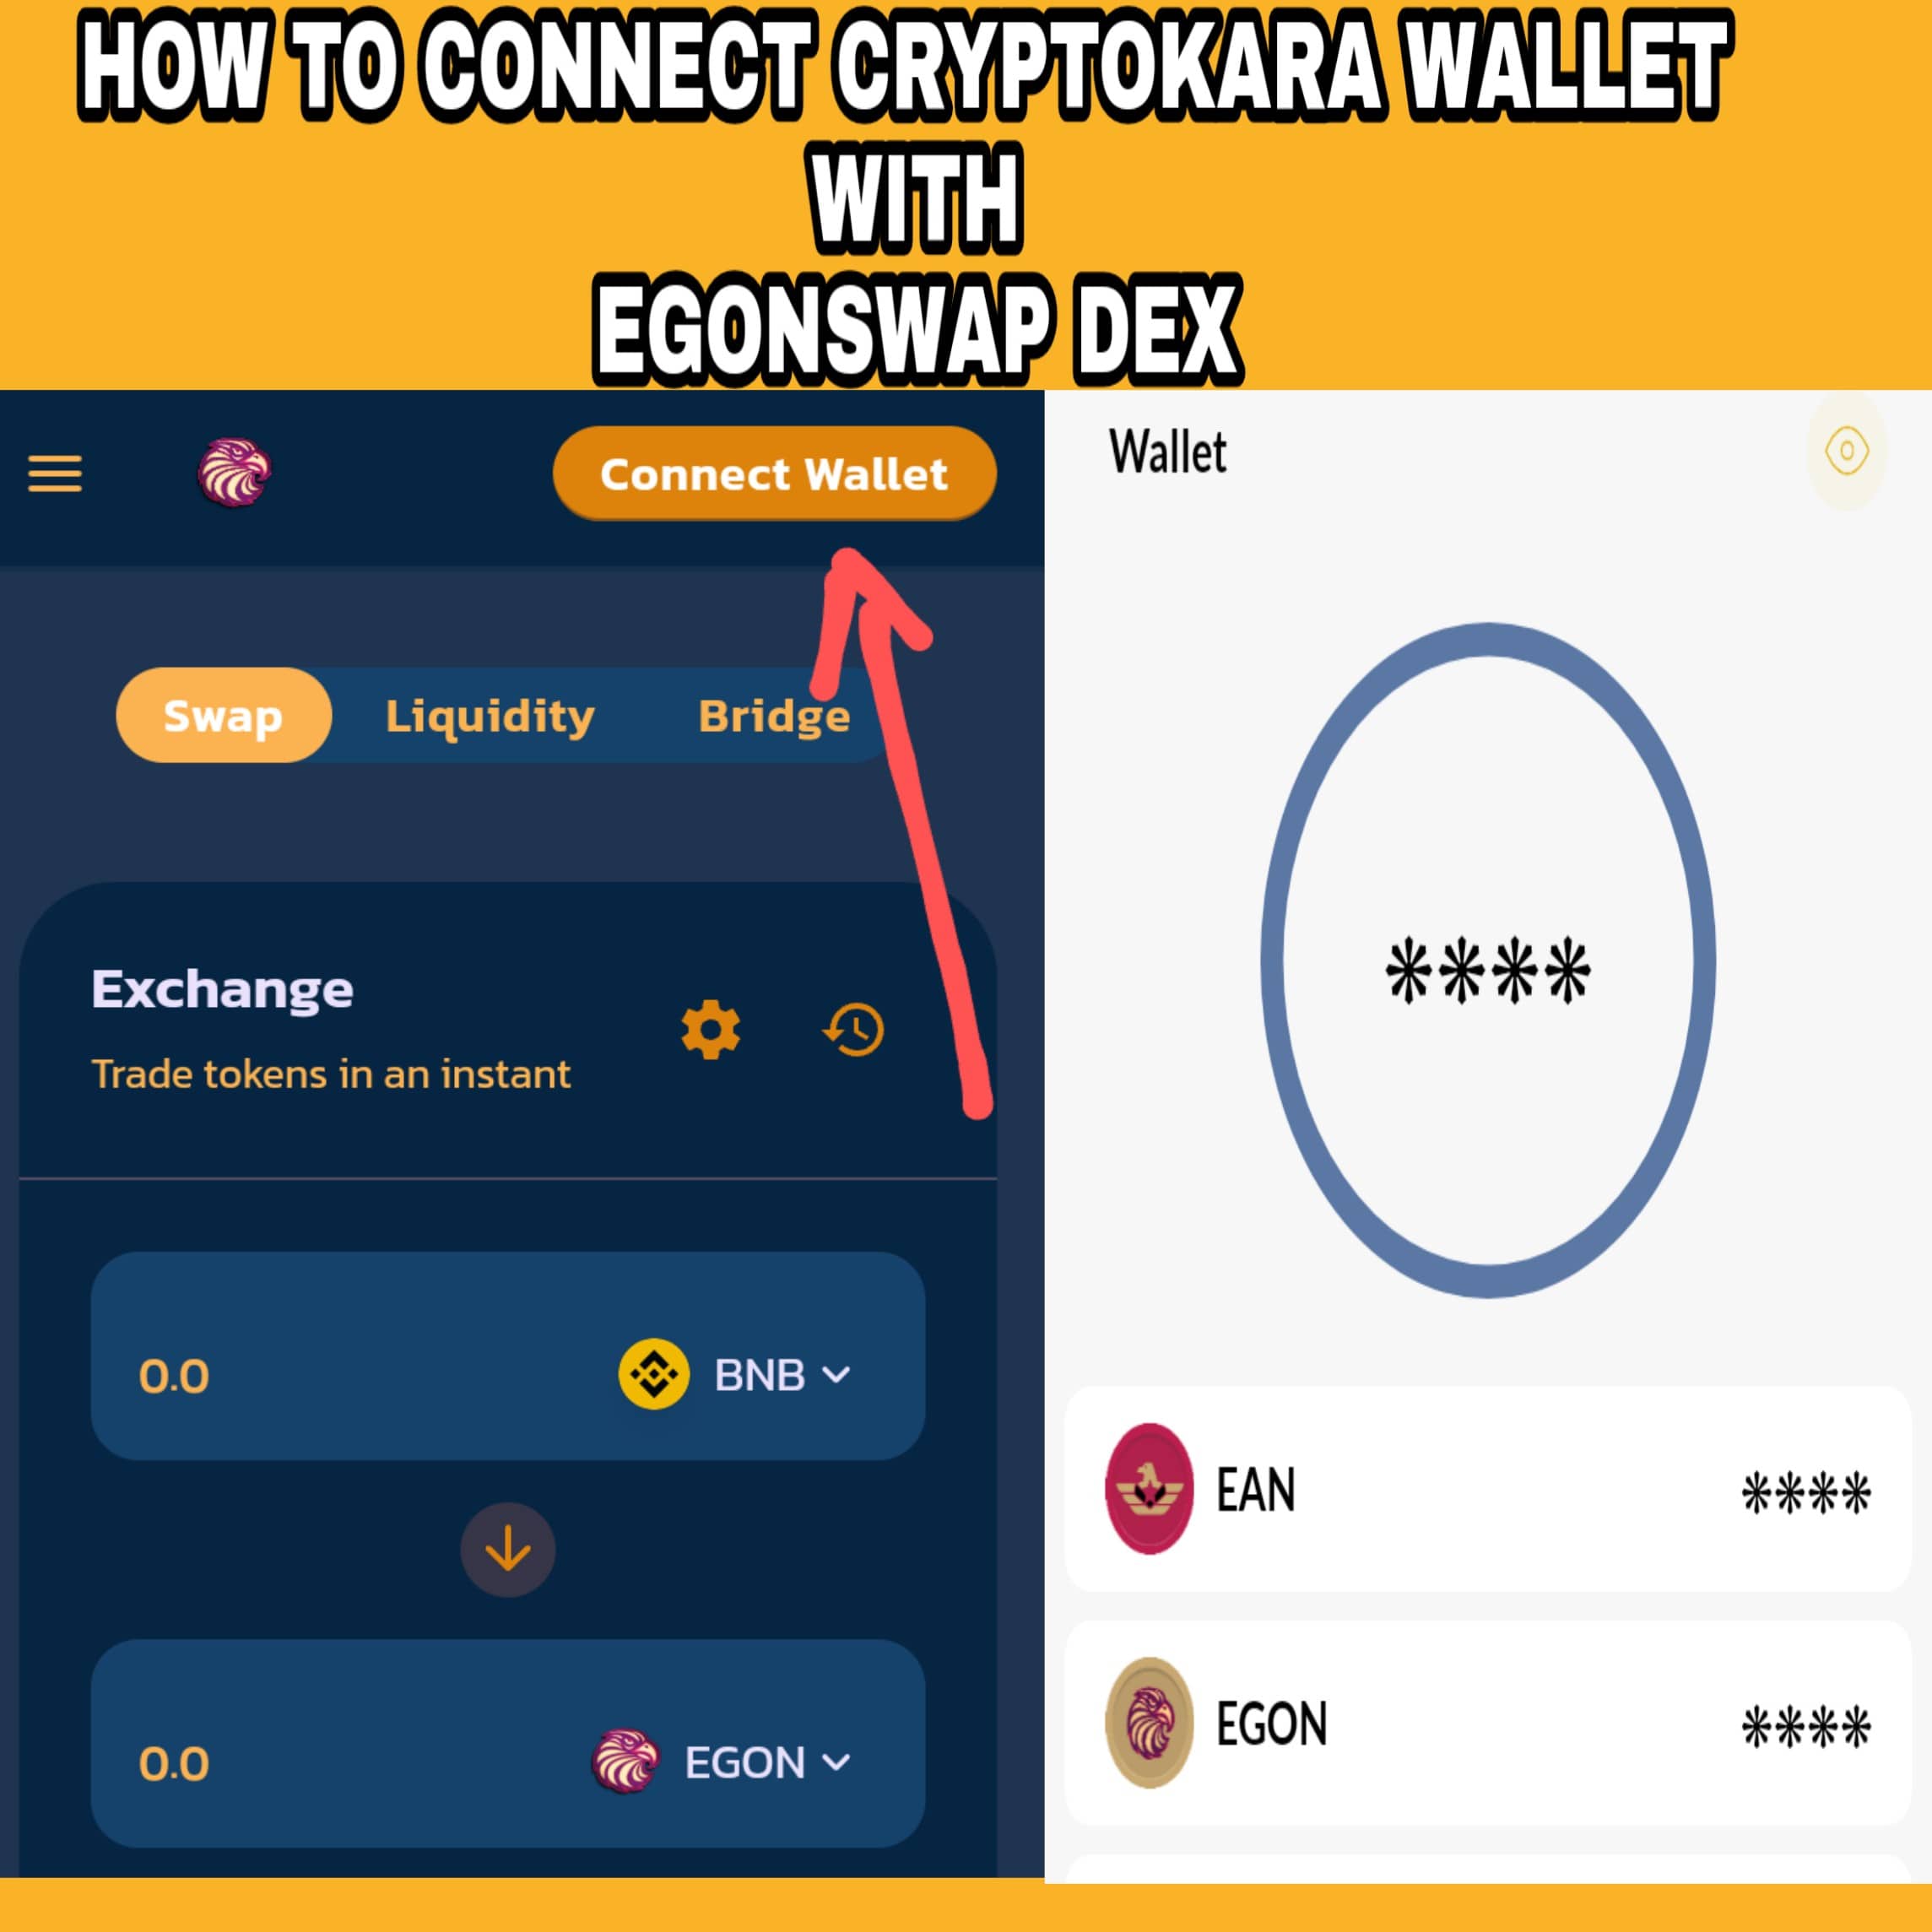 How to Connect Cryptokara Wallet with EgonSwap Dex